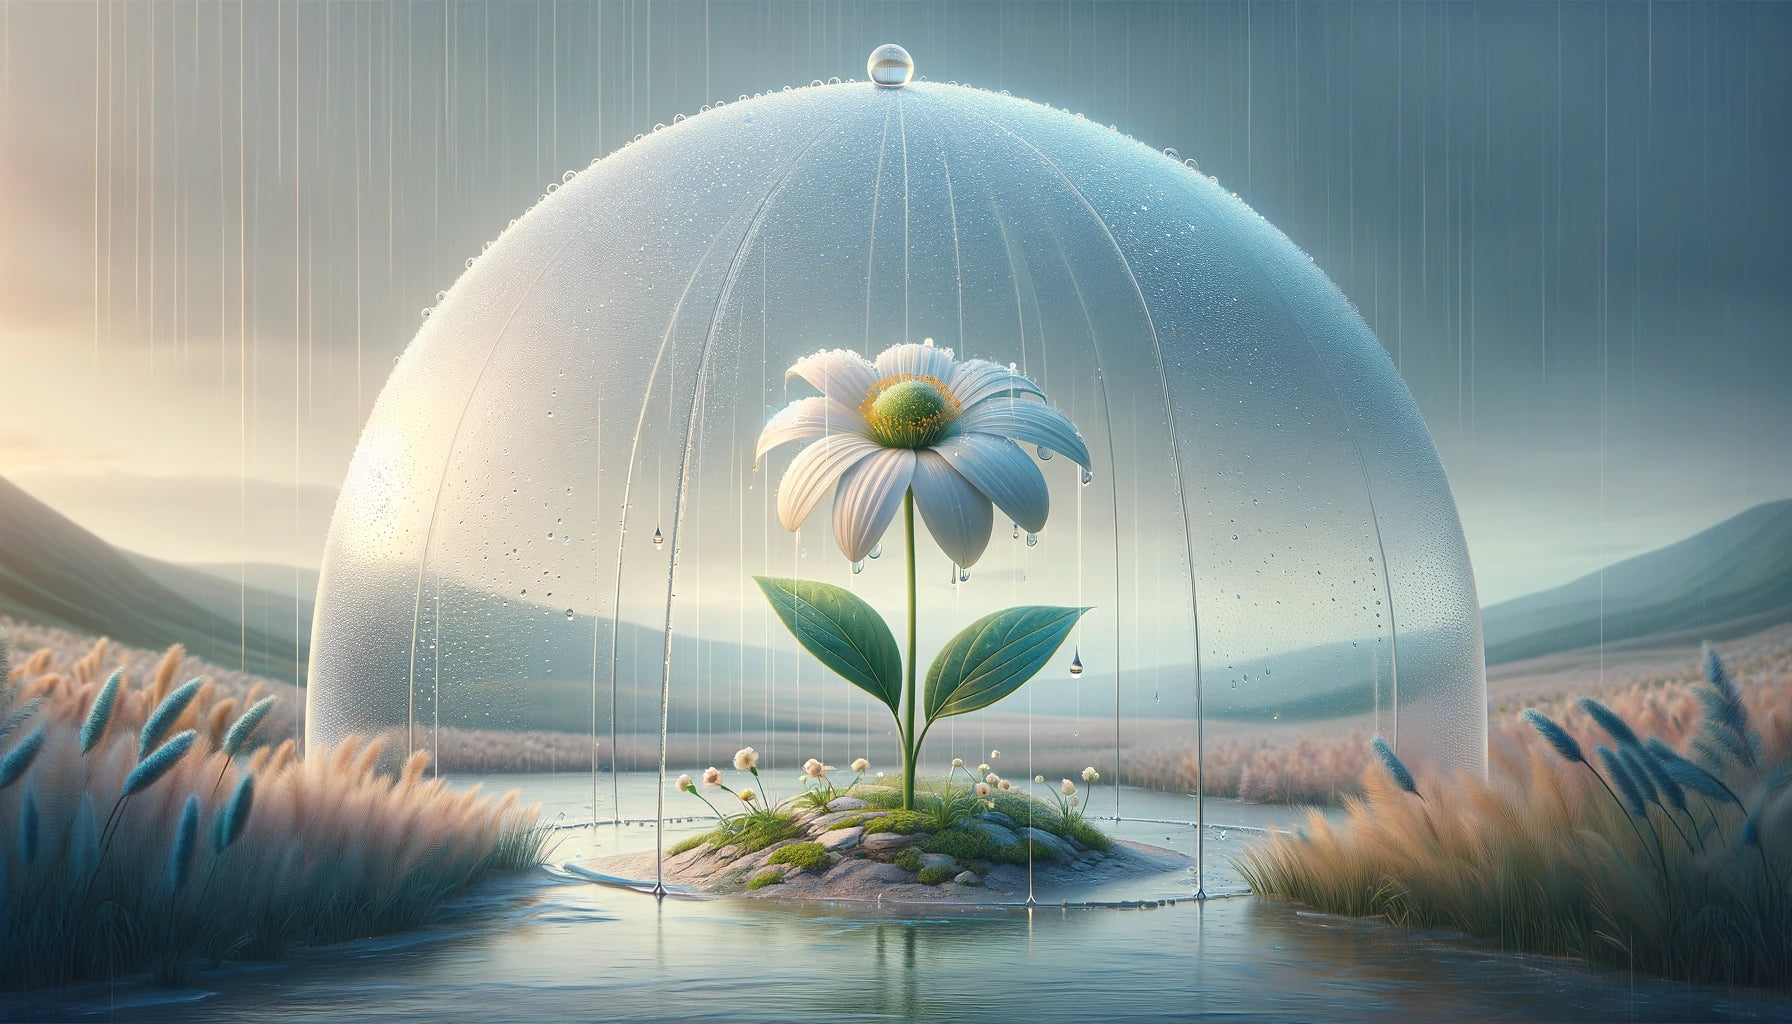 Protective dome covering a delicate flower under rain